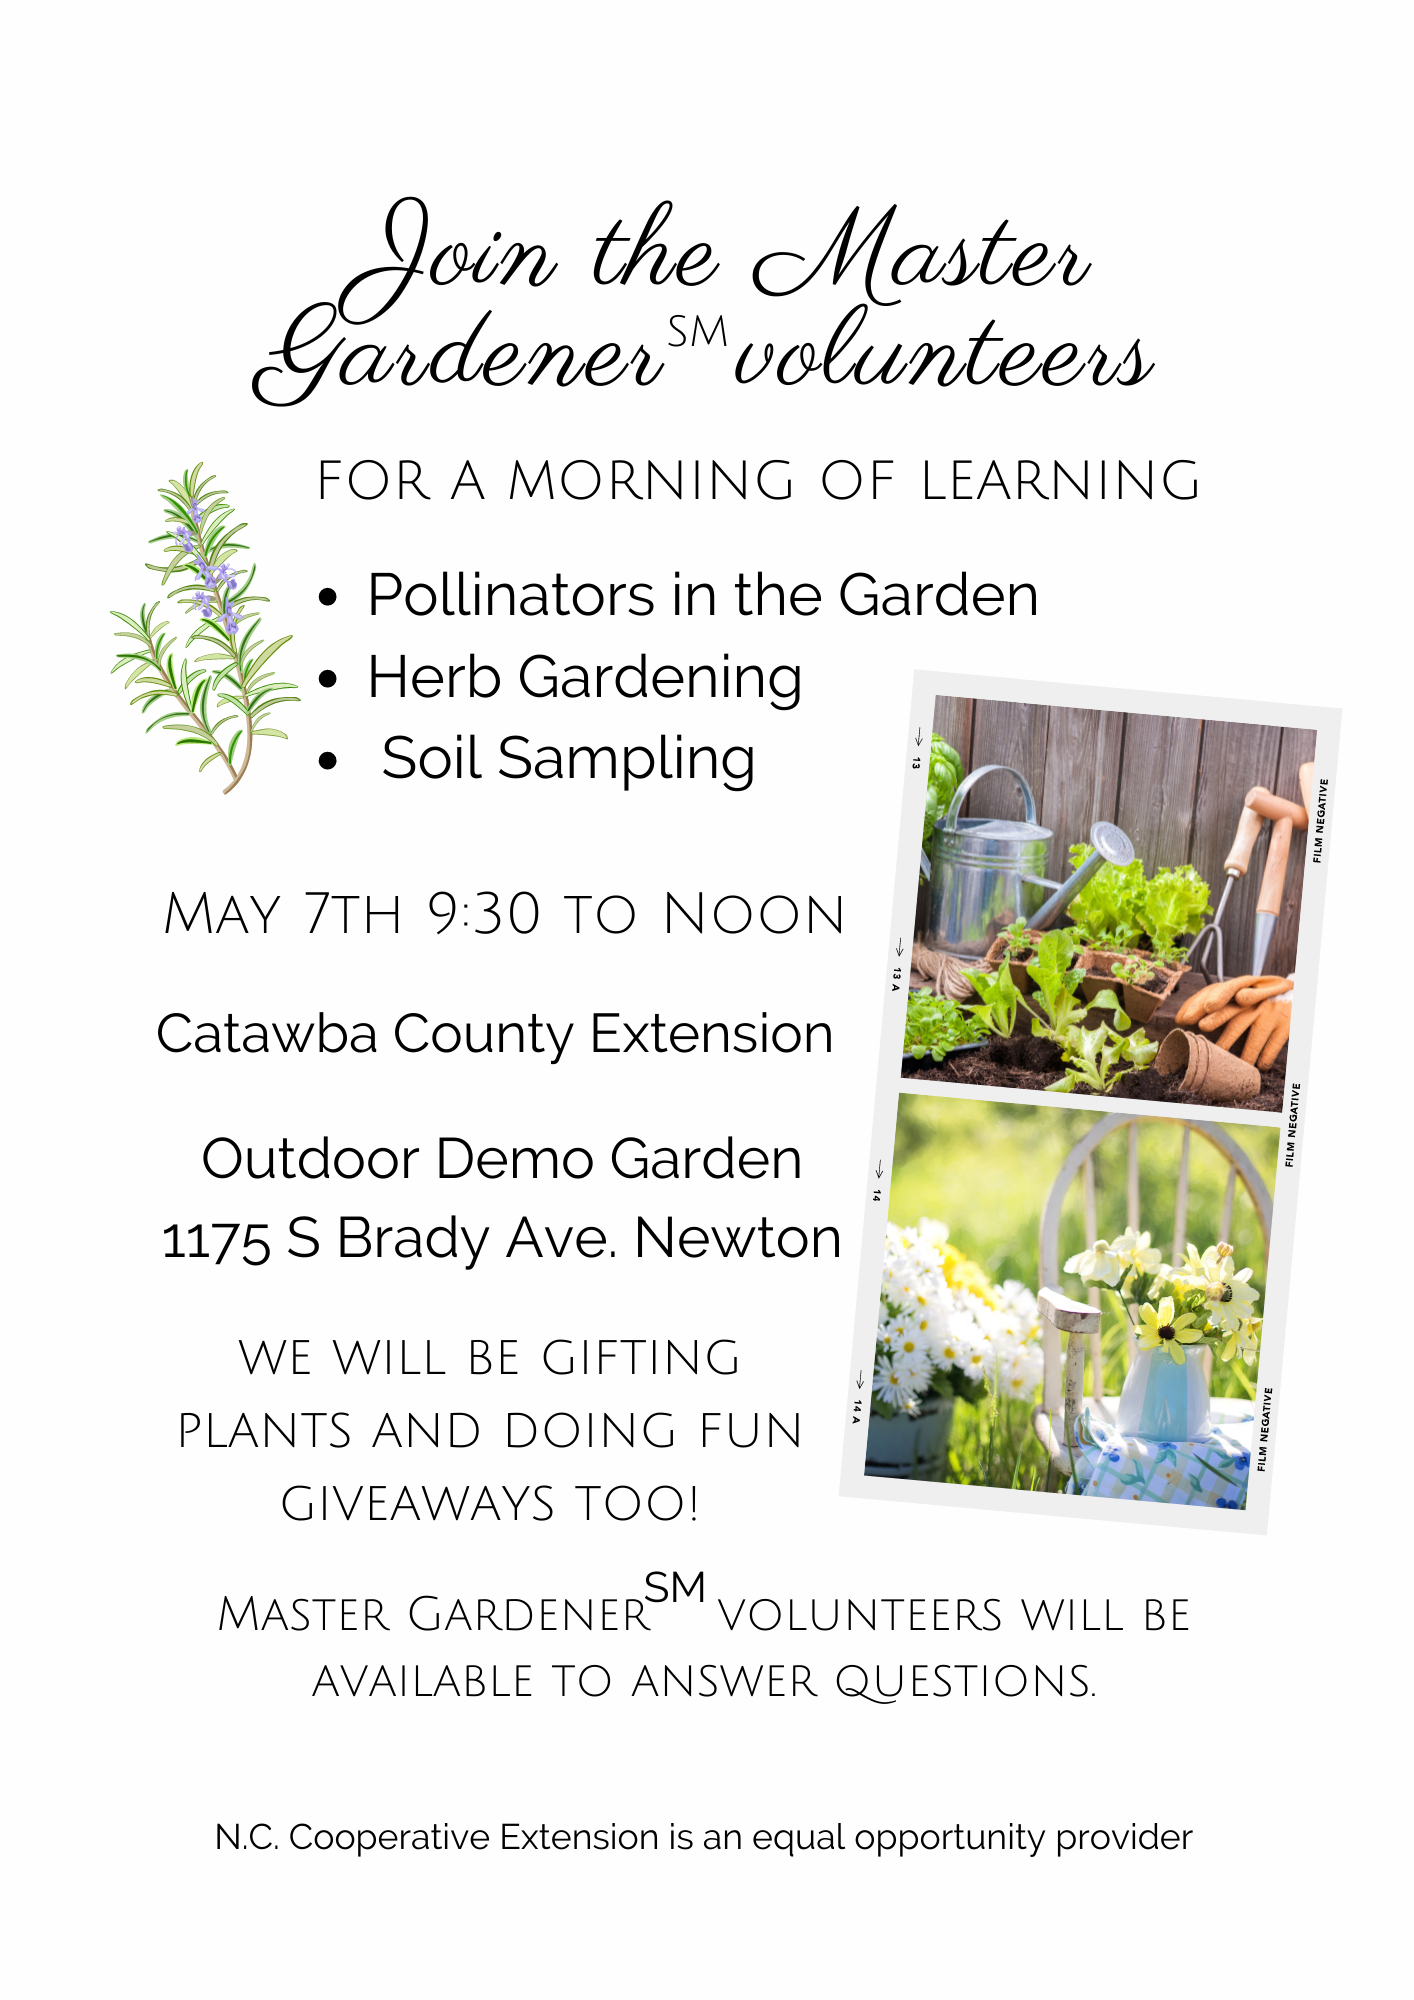 Join the Master Gardener℠ volunteers for a morning of learning. Topics will include pollinators in the garden, herb gardening, soil sampling. May 7th 9:30 a.m. till noon. 